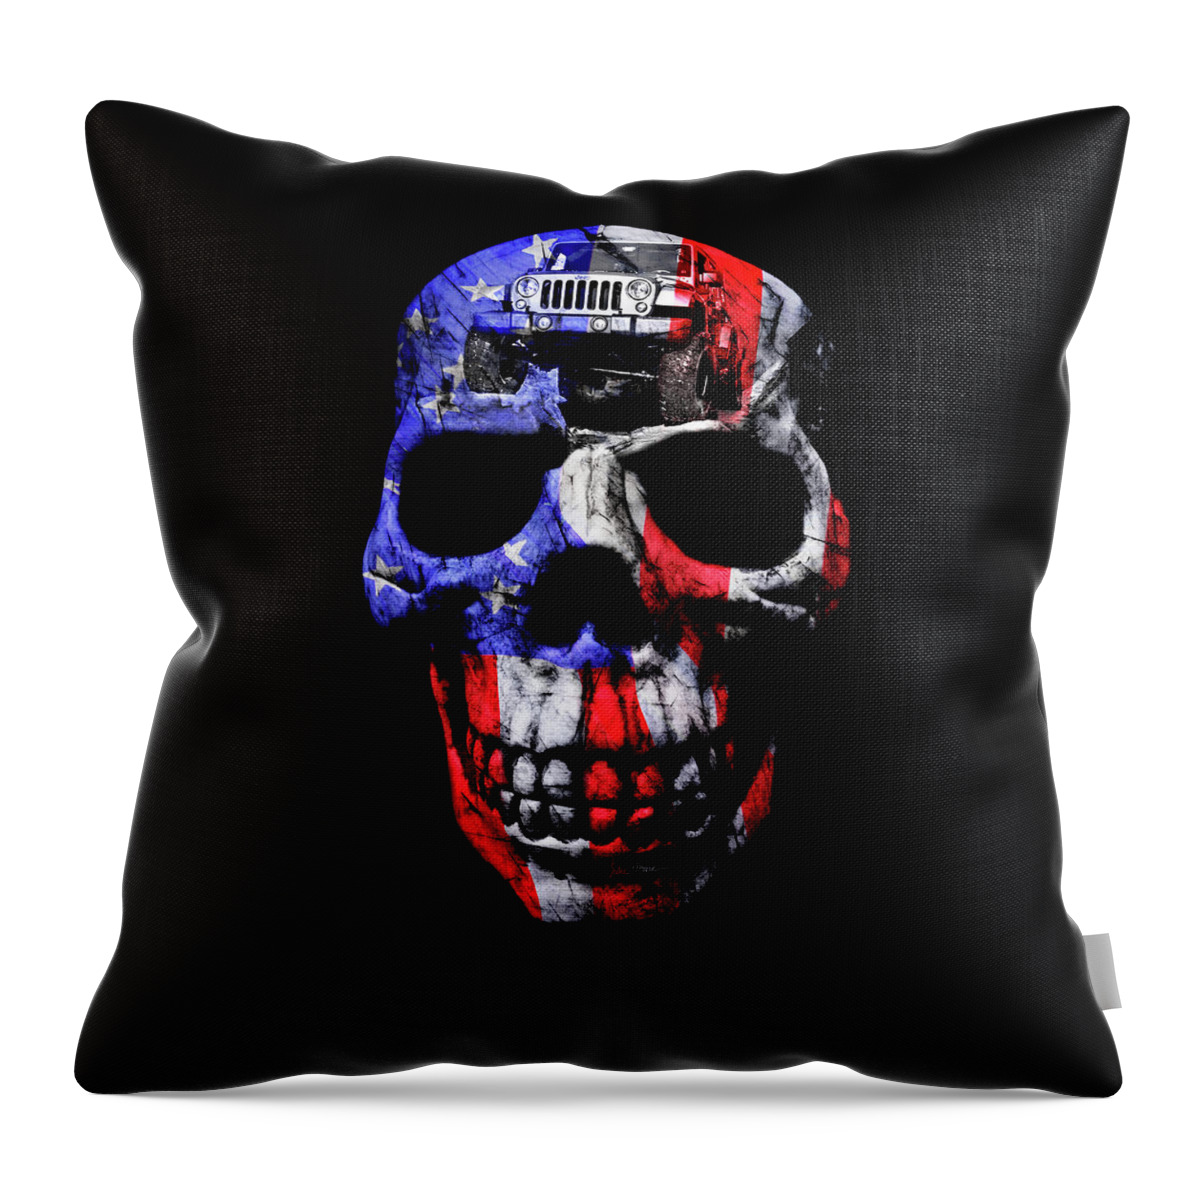 Jeep Throw Pillow featuring the photograph Patriotic Jeeper Skull JKU Wrangler by Luke Moore